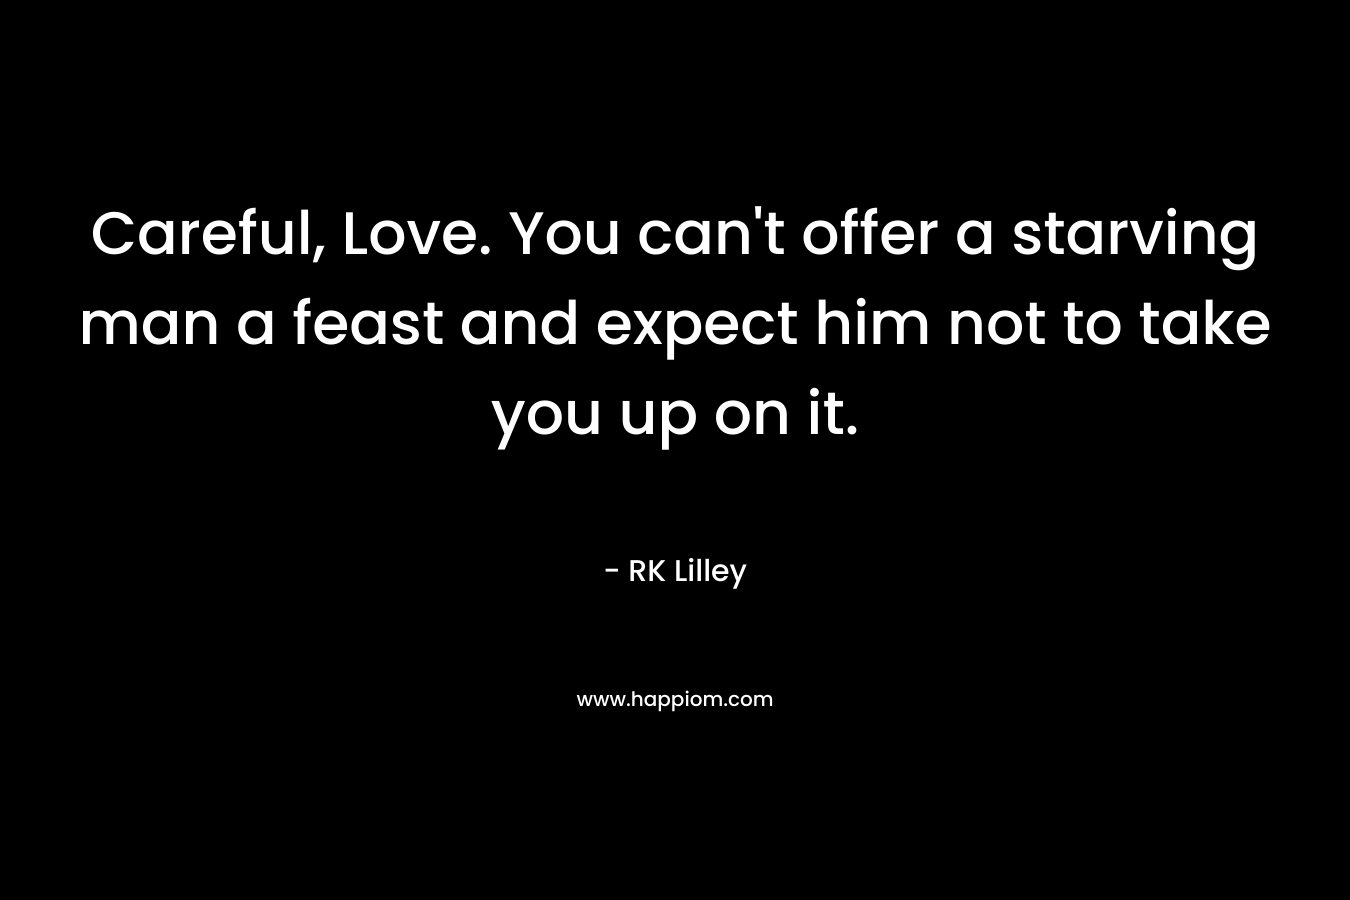 Careful, Love. You can't offer a starving man a feast and expect him not to take you up on it.